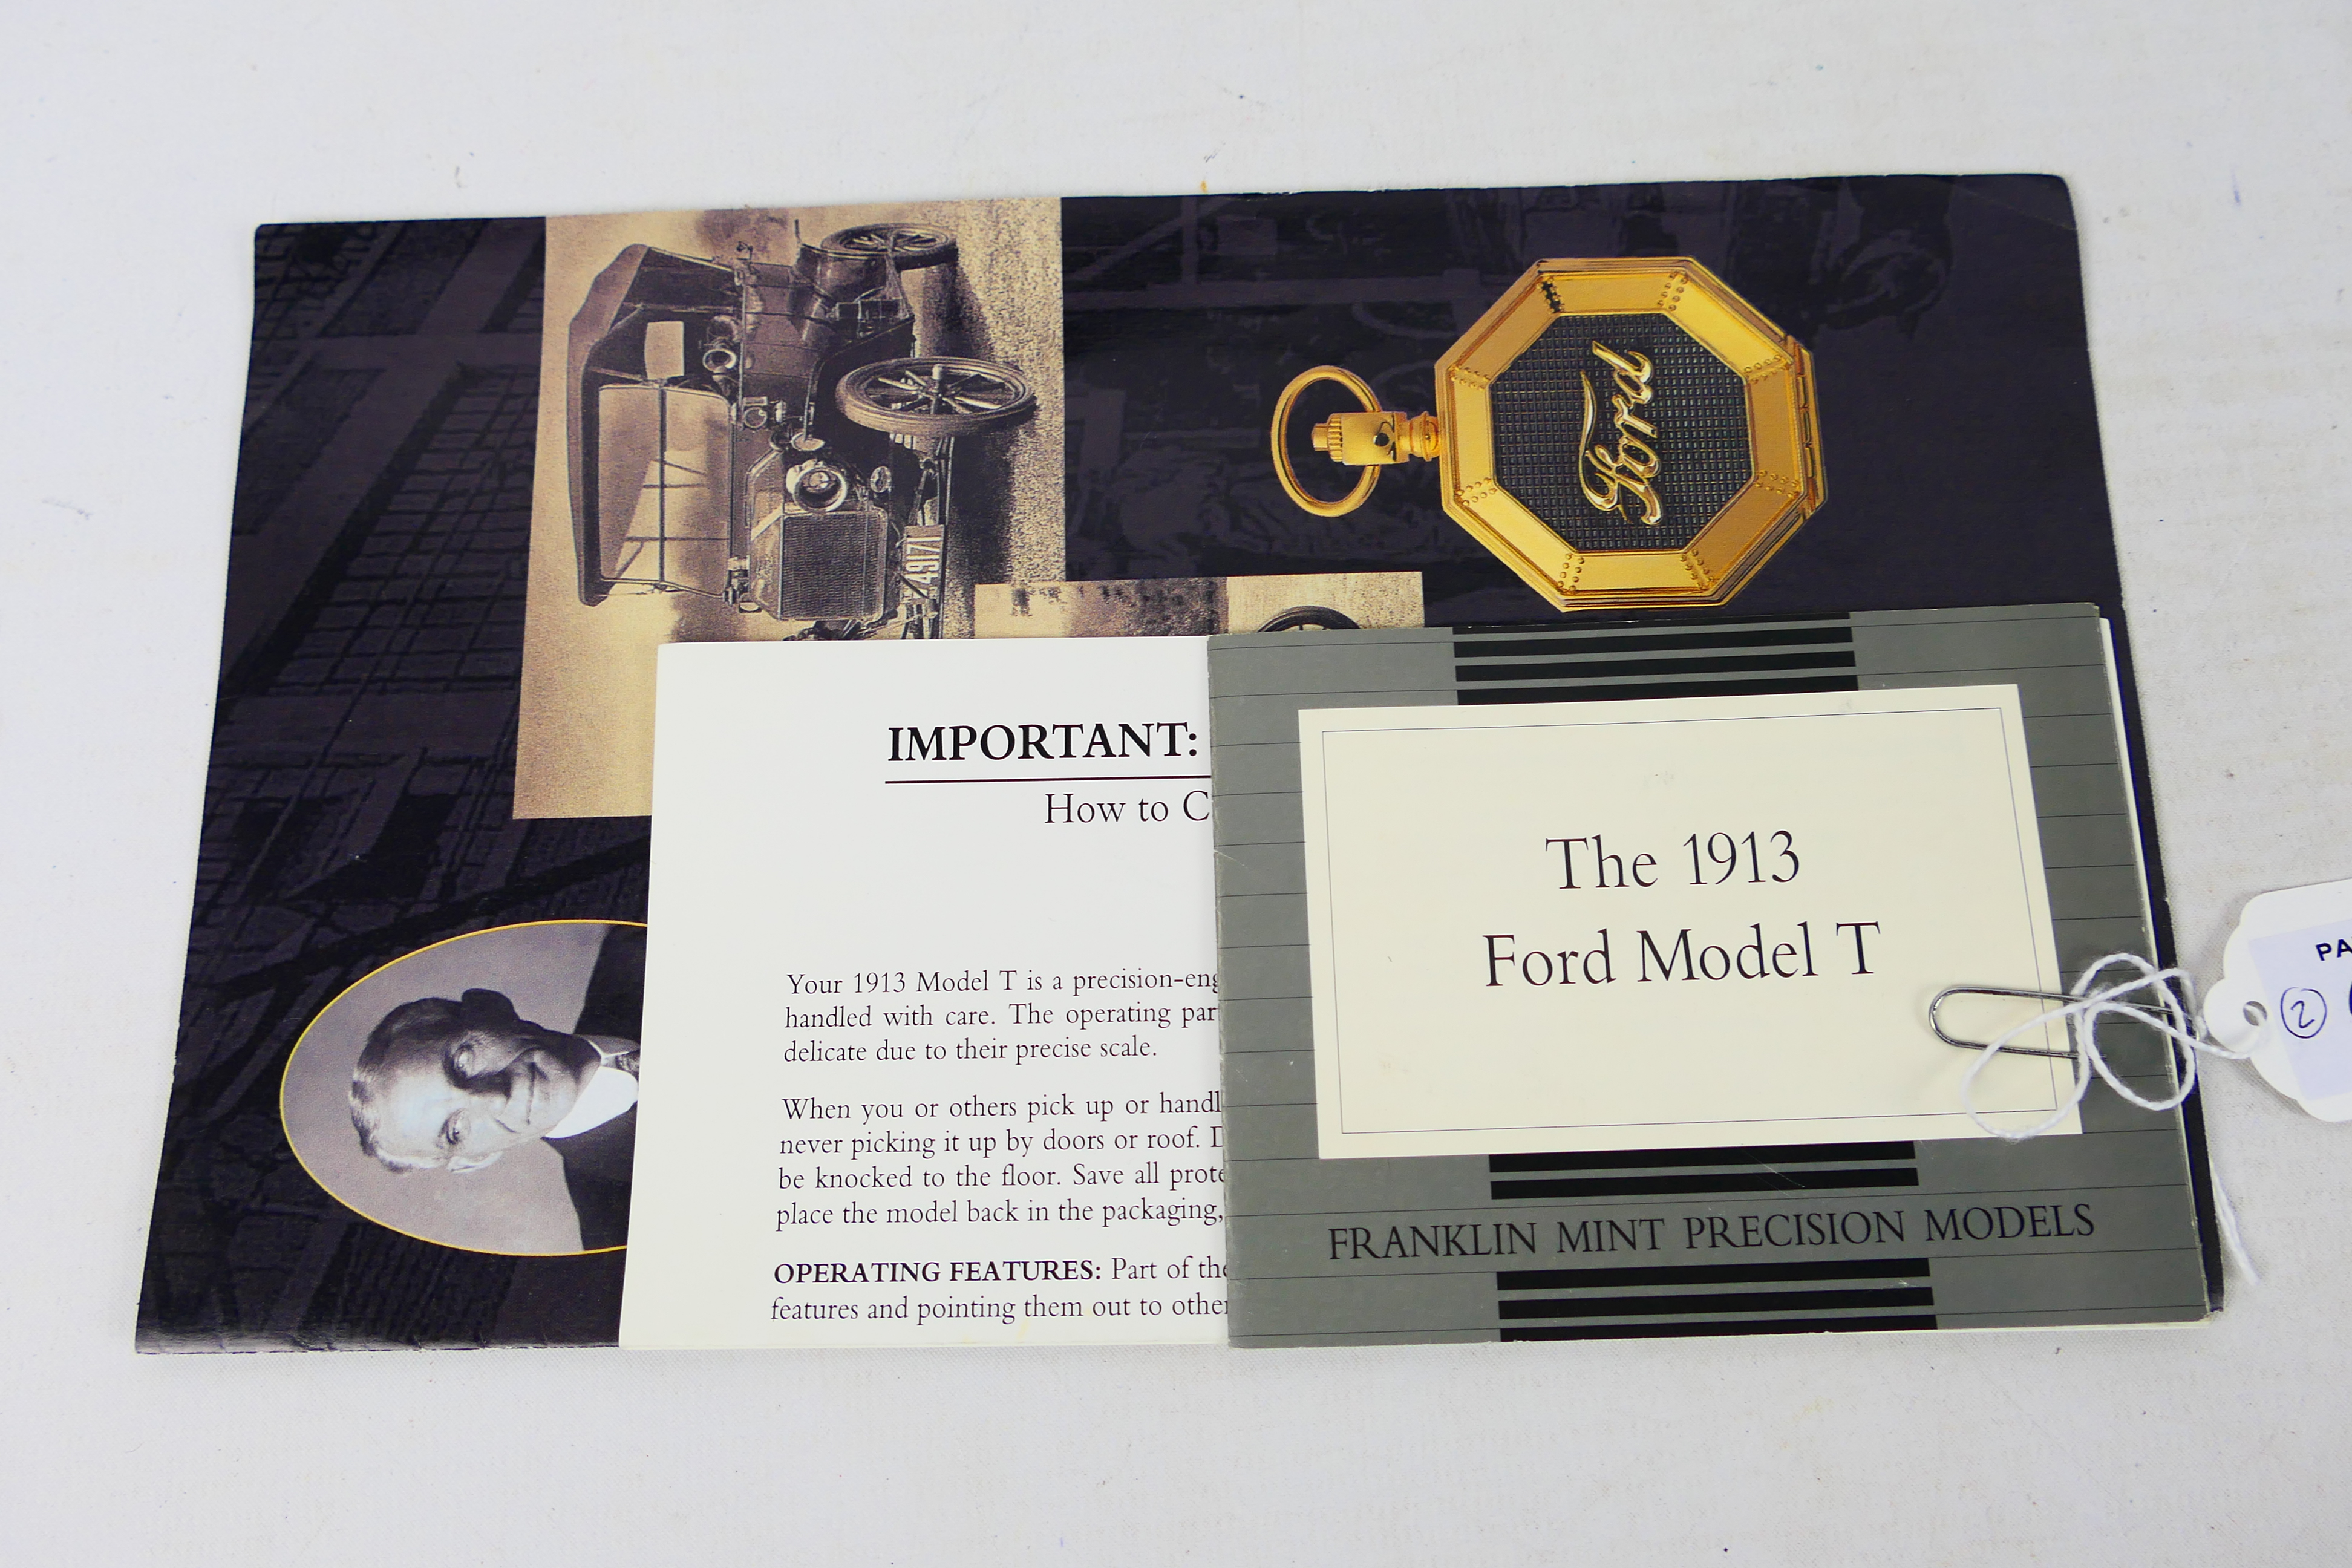 Franklin Mint - A 1:16 scale 1913 Ford Model T. - Image 9 of 9